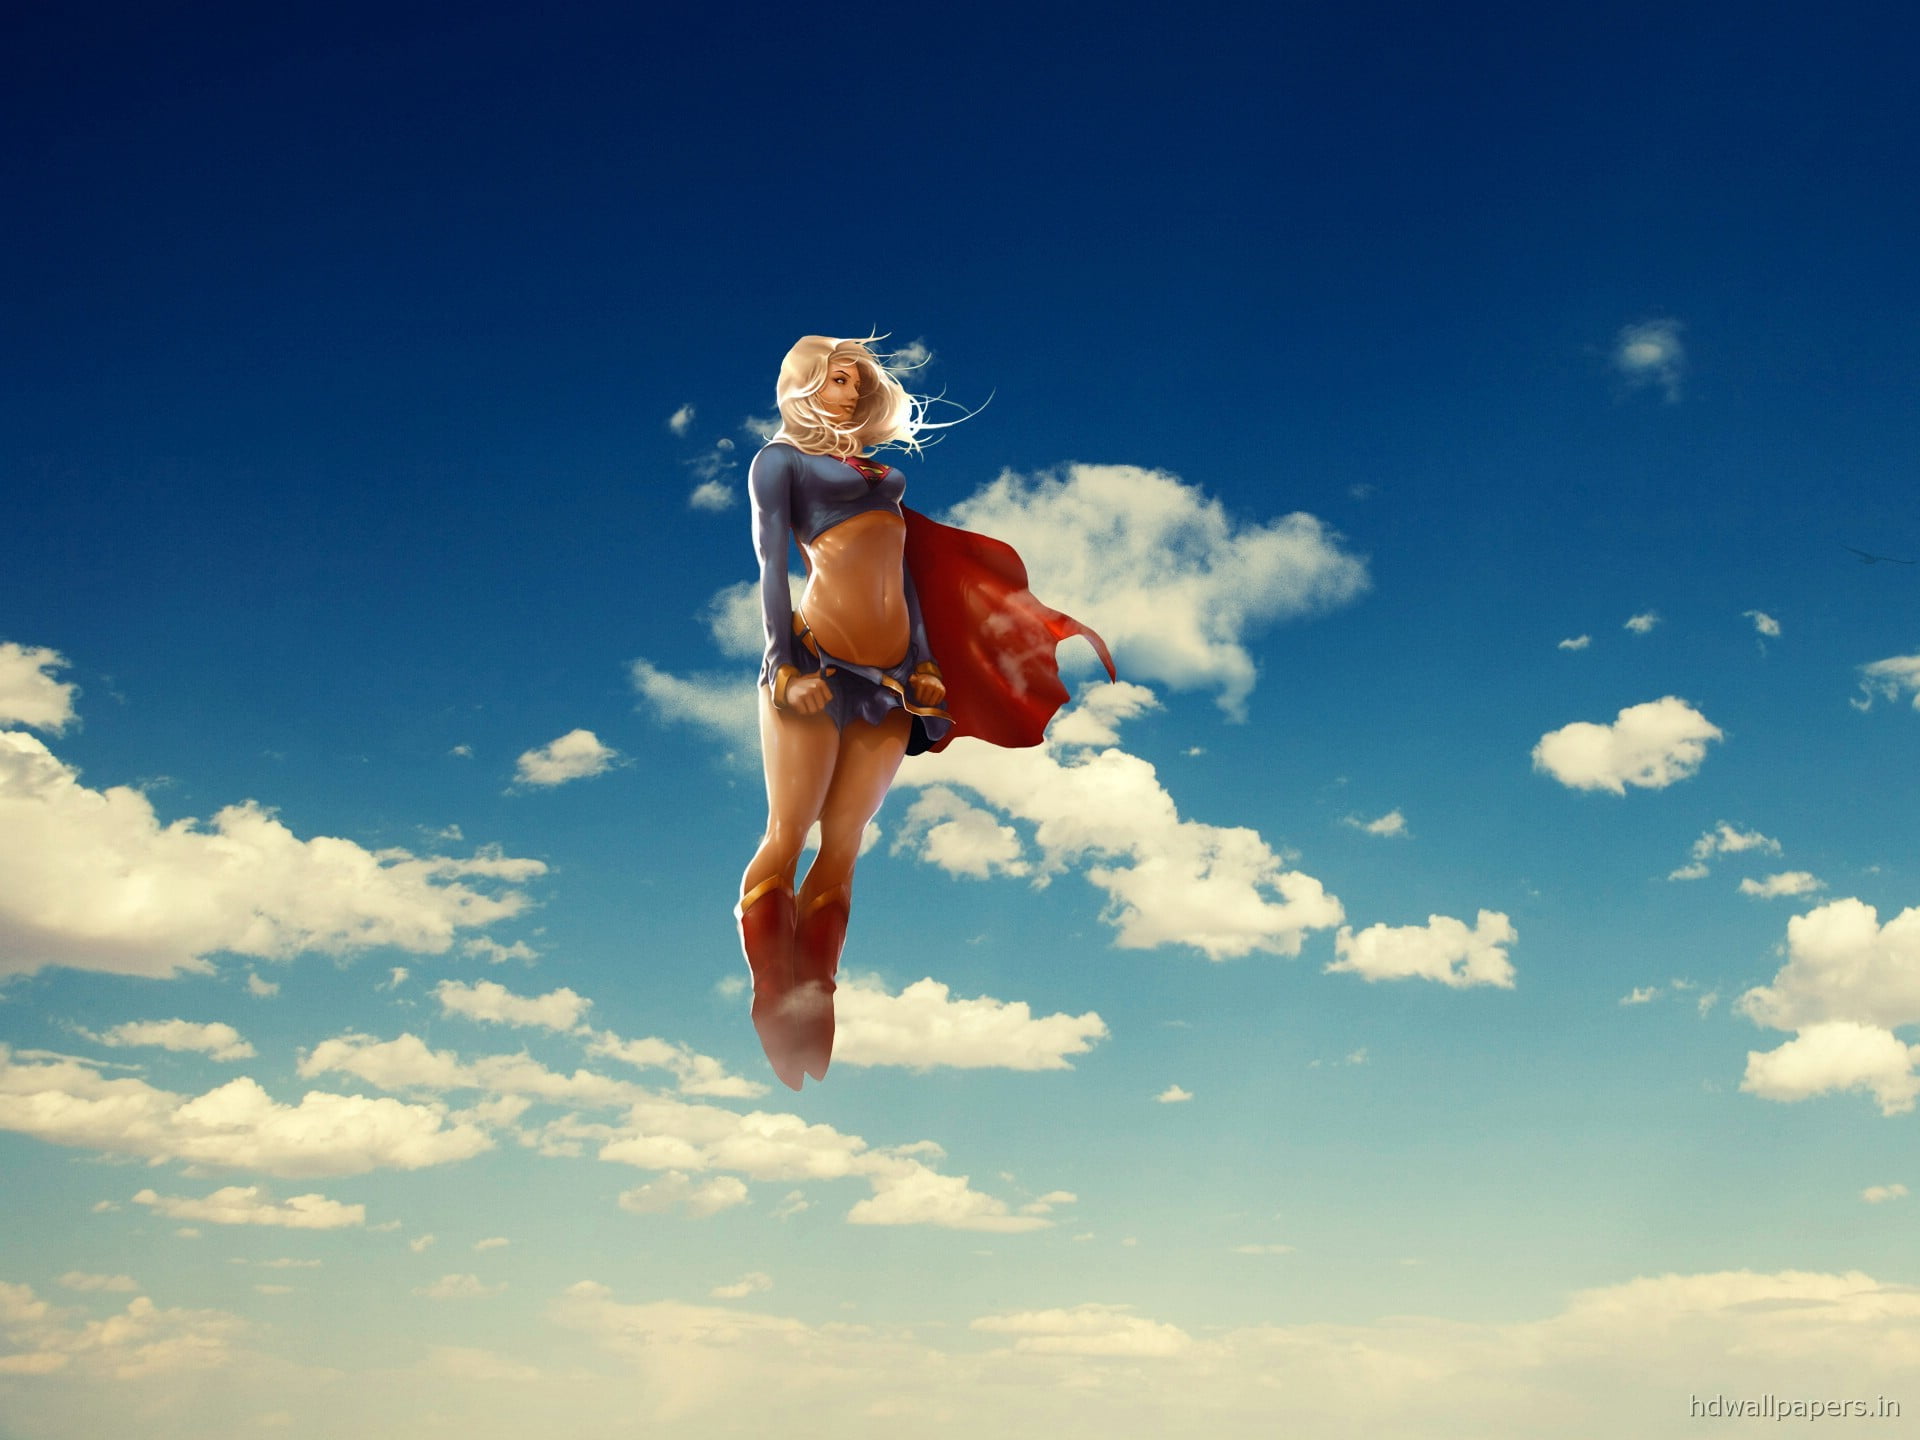 Super Woman wallpaper, Supergirl, sky, clouds, anime, flying